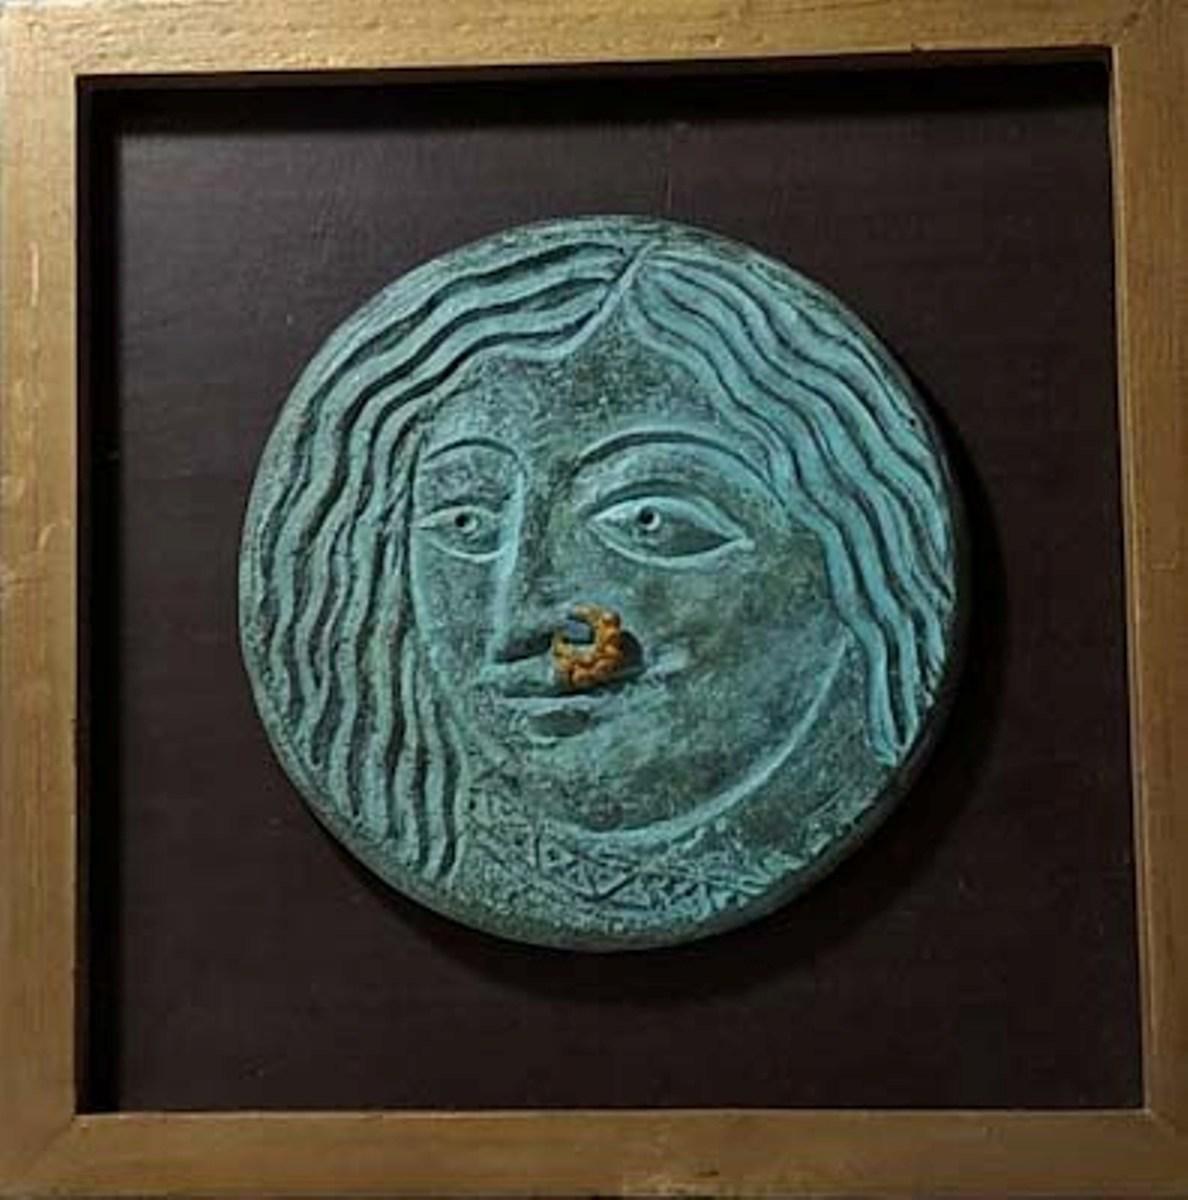 Subrata Biswas Figurative Sculpture - Relief, Face, Bronze Sculpture, Green by Contemporary Indian Artist "In Stock"